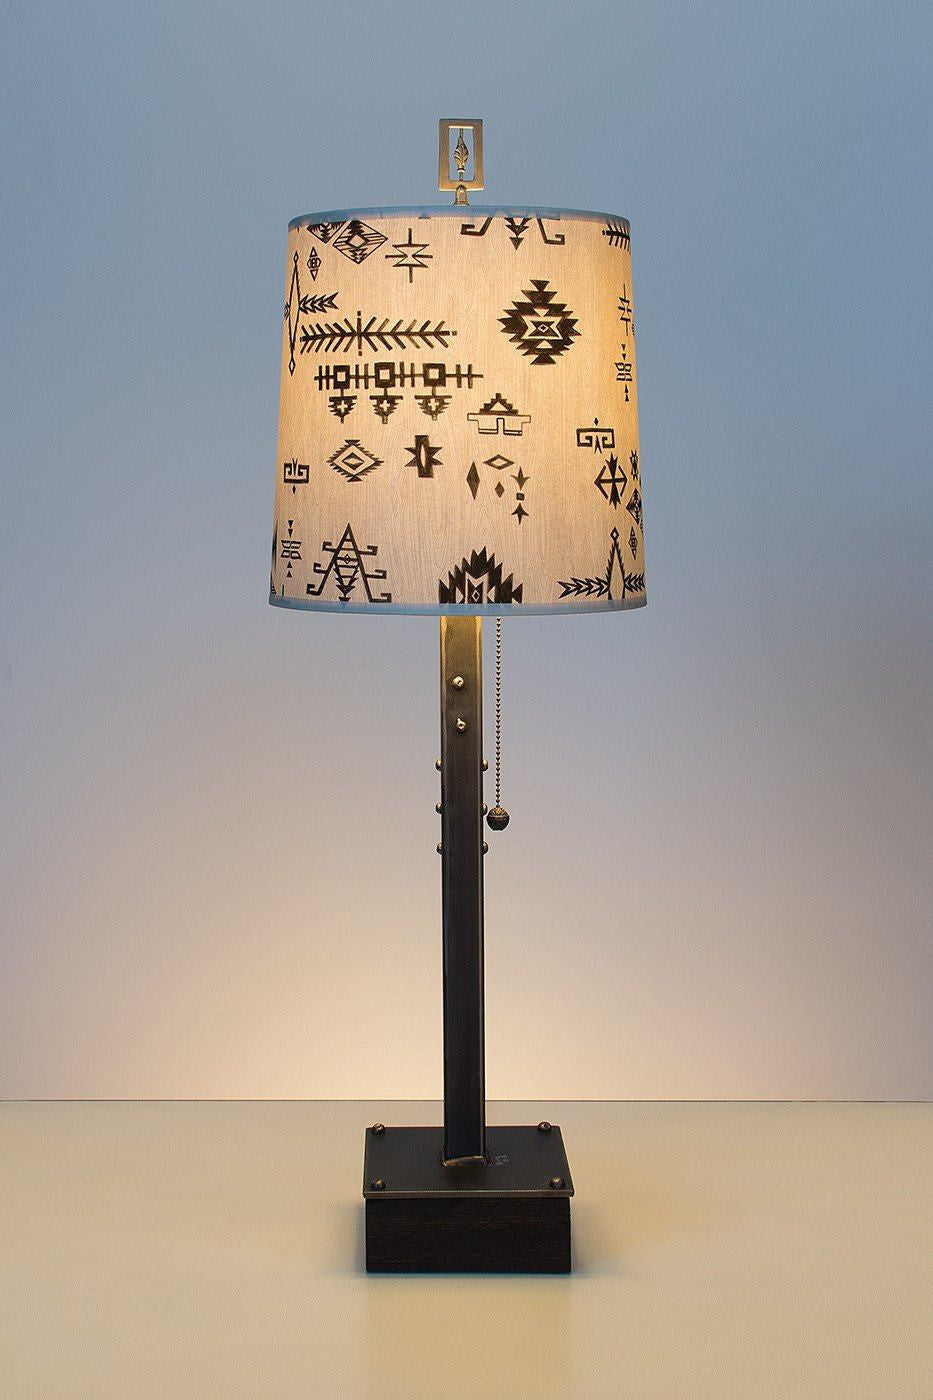 Janna Ugone &amp; Co Table Lamps Steel Table Lamp on Wood with Medium Drum Shade in Blanket Sketch